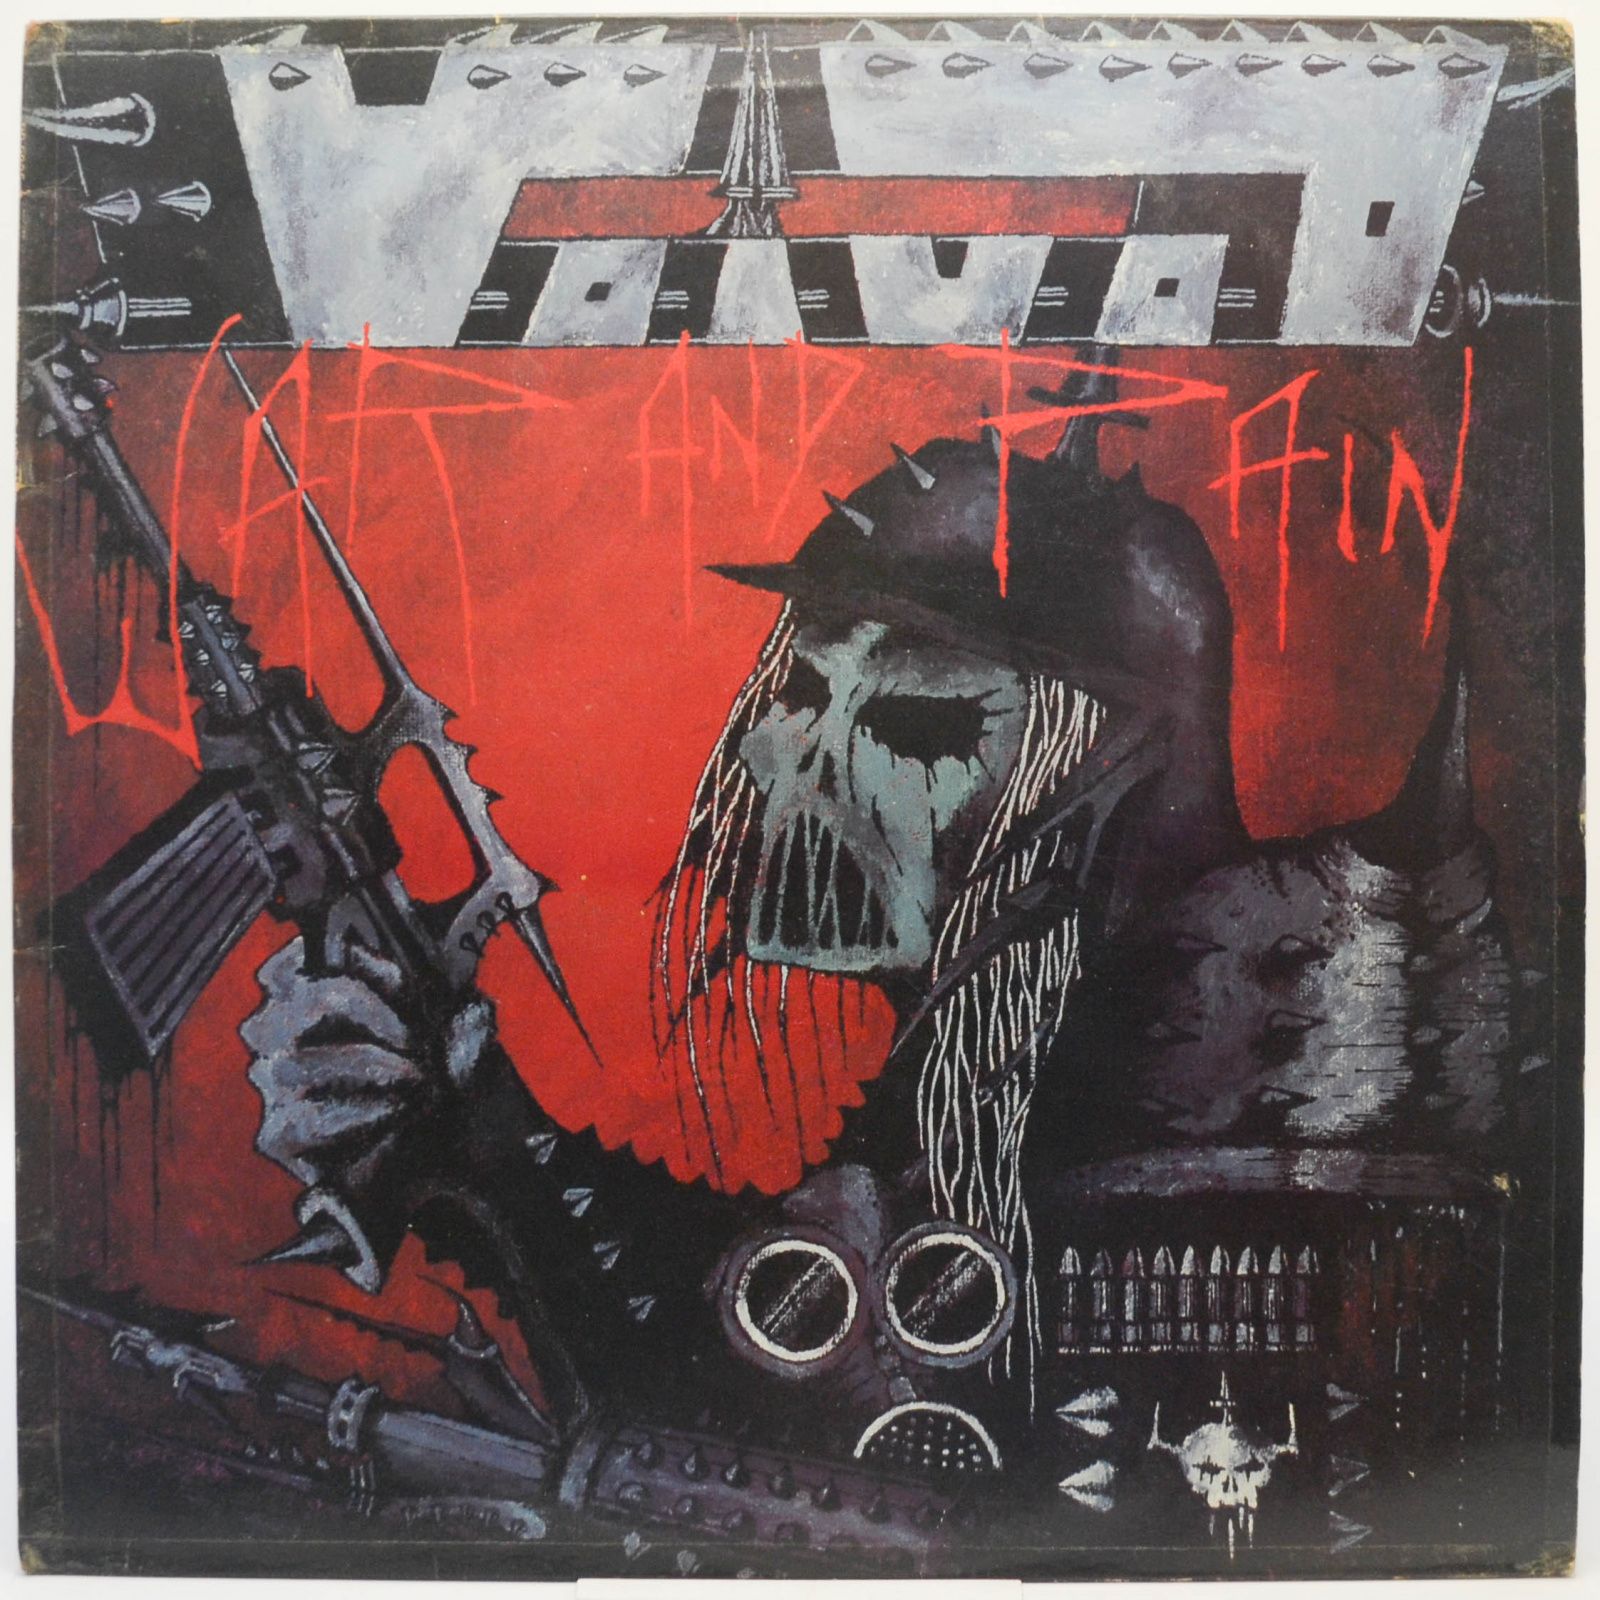 Voïvod — War And Pain, 1984